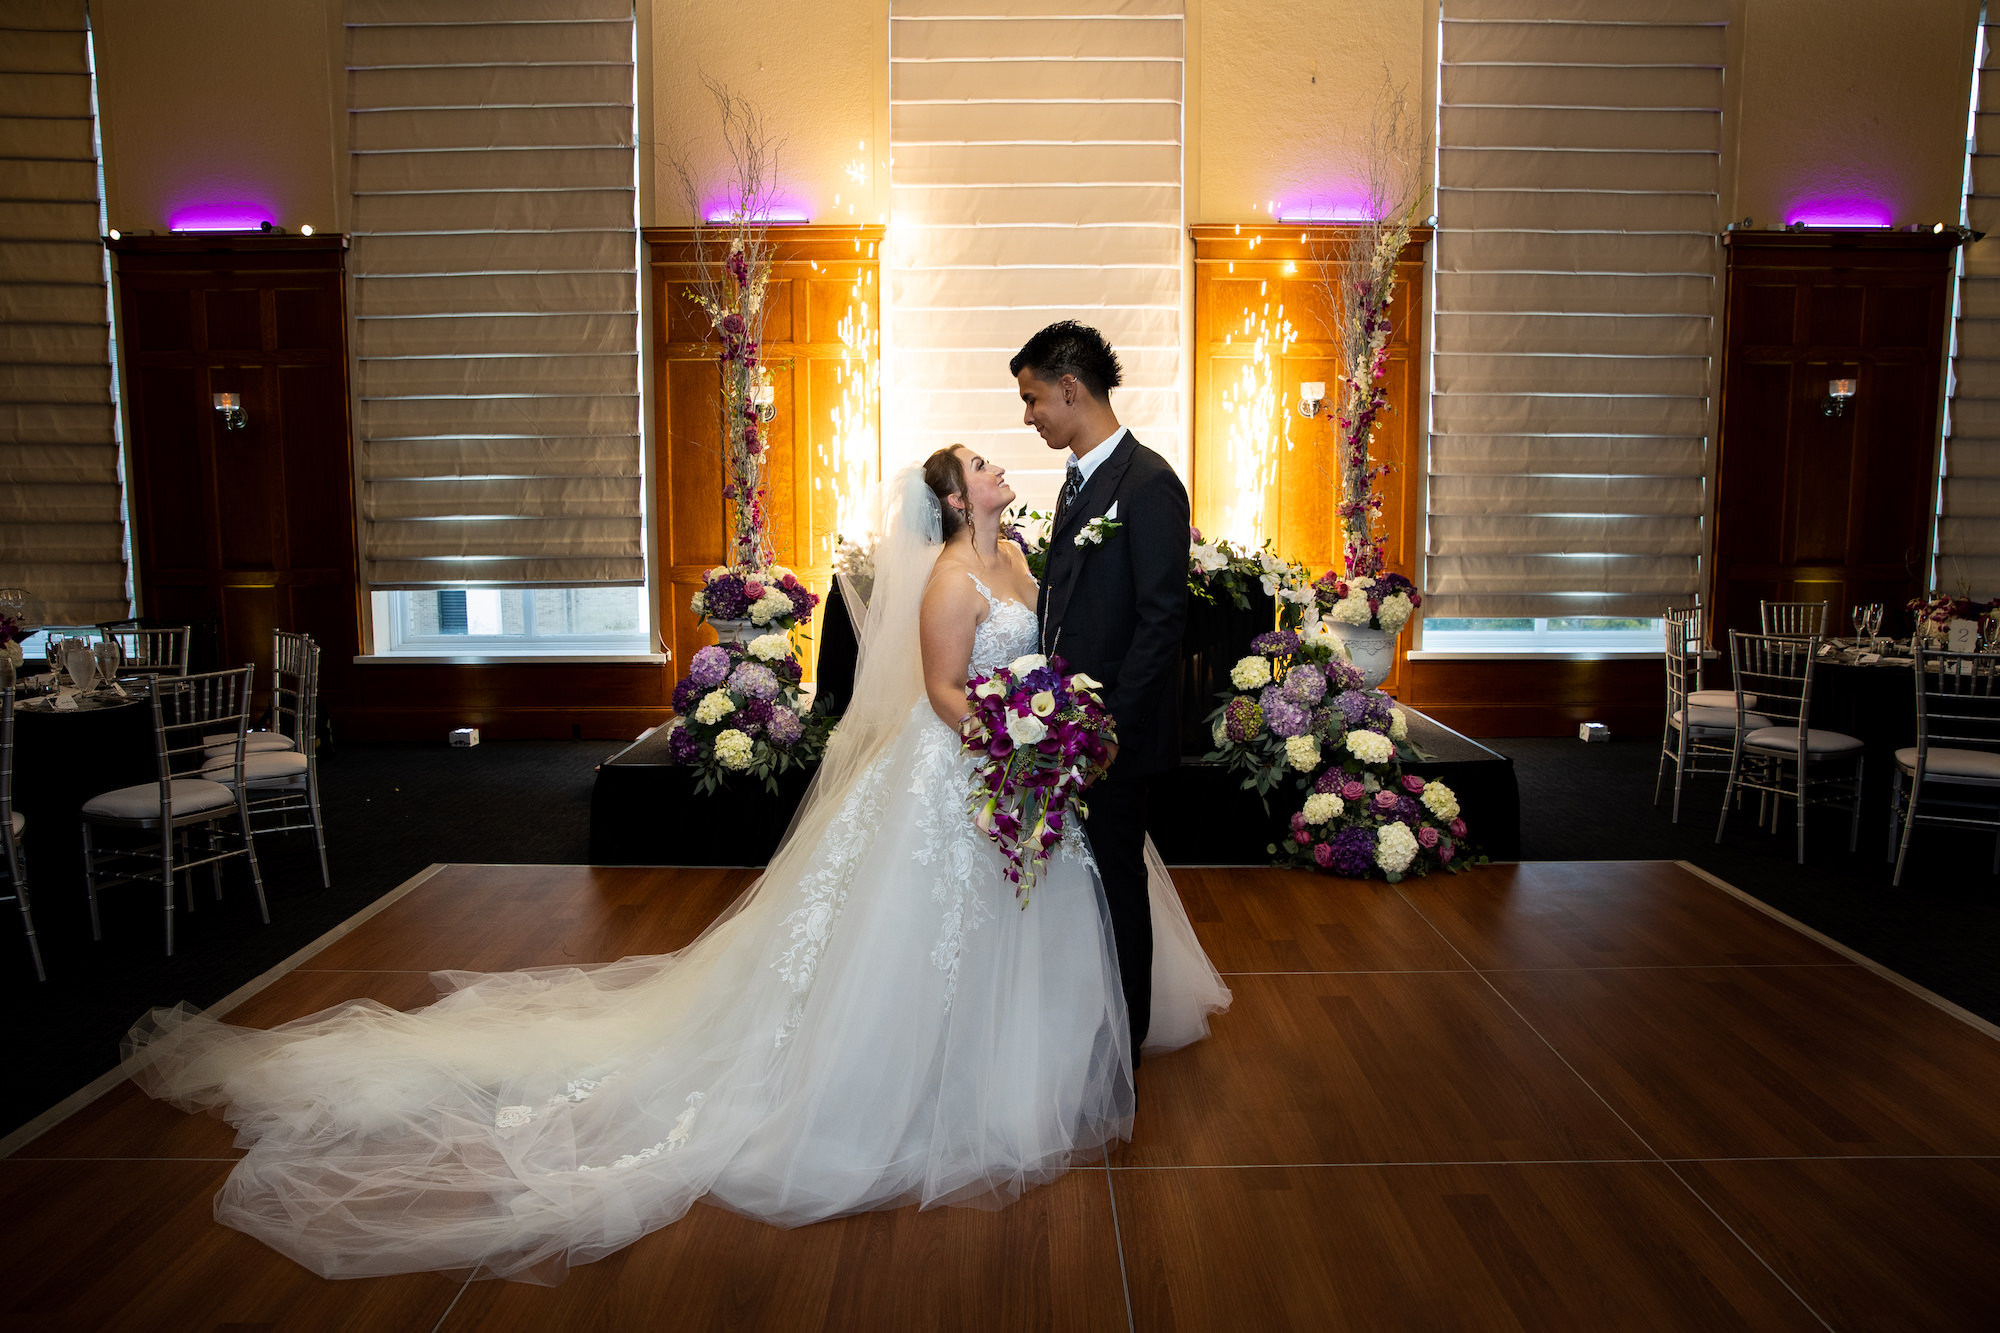 Bride and Groom Wedding Reception Portrait | Tampa Wedding Planner Special Moments Events | Downtown Tampa Venue Le Meridien